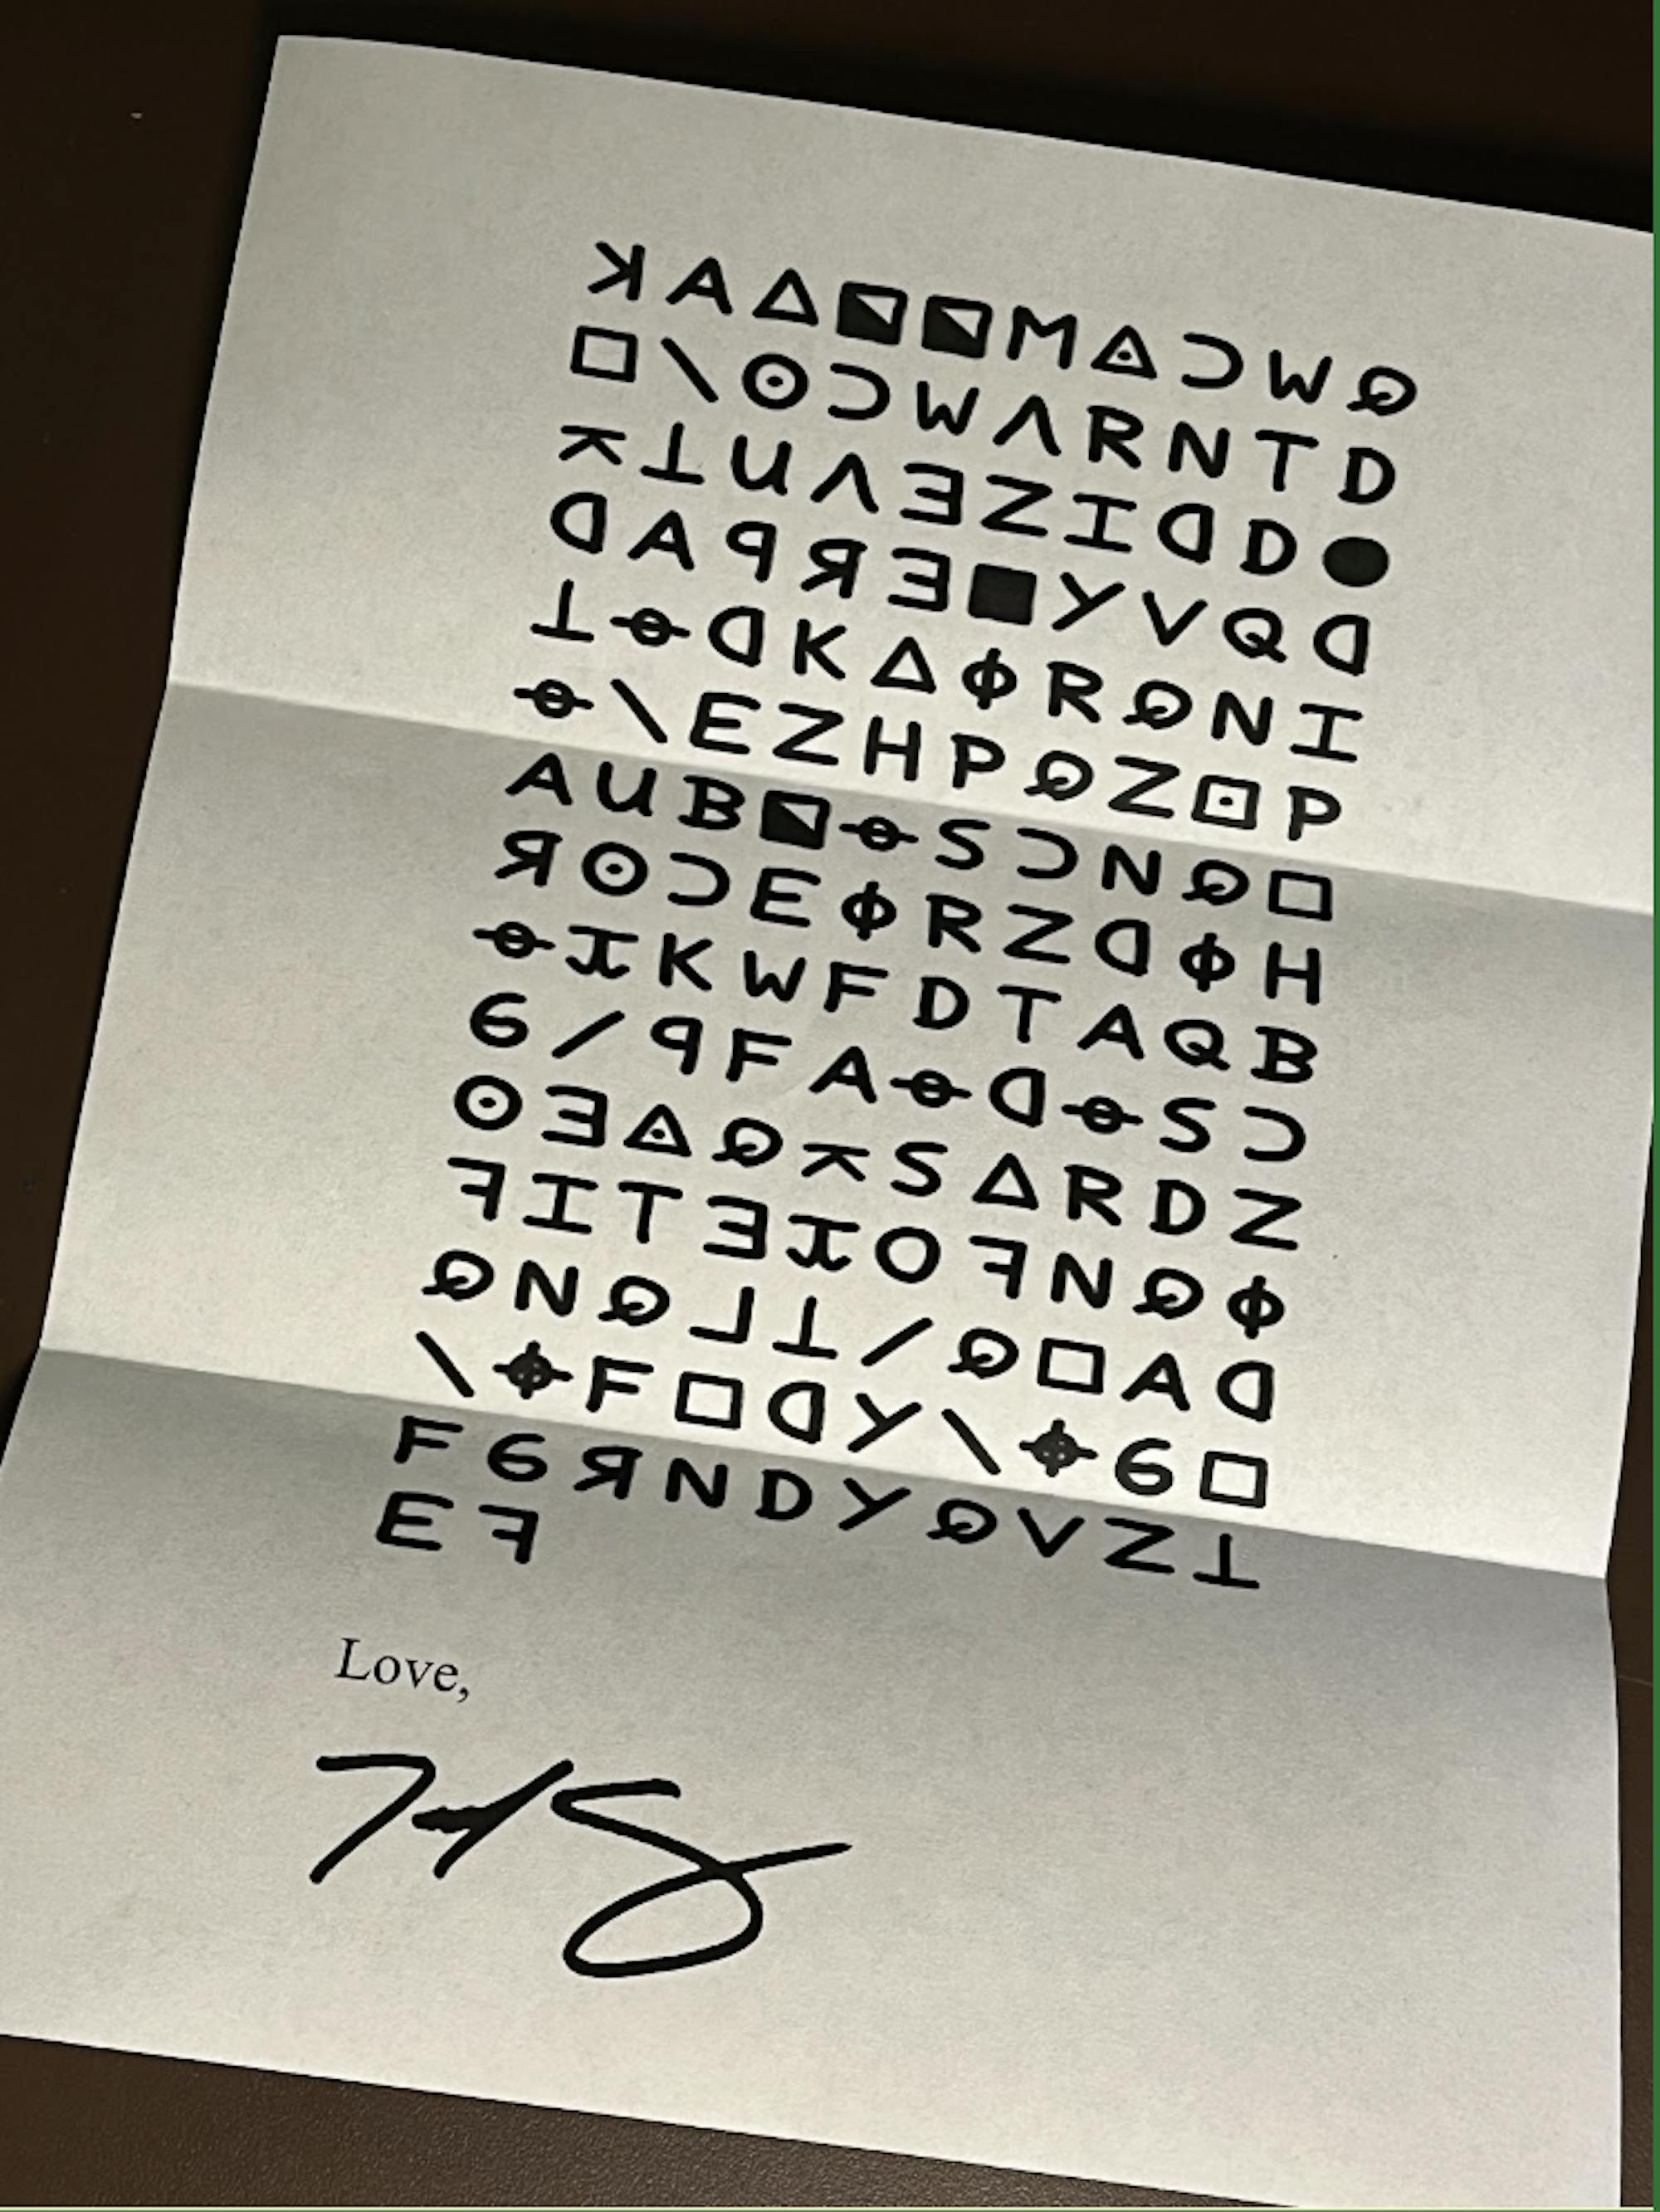 Image of a sheet of paper with cipher text written on it, signed by Ted Cruz.